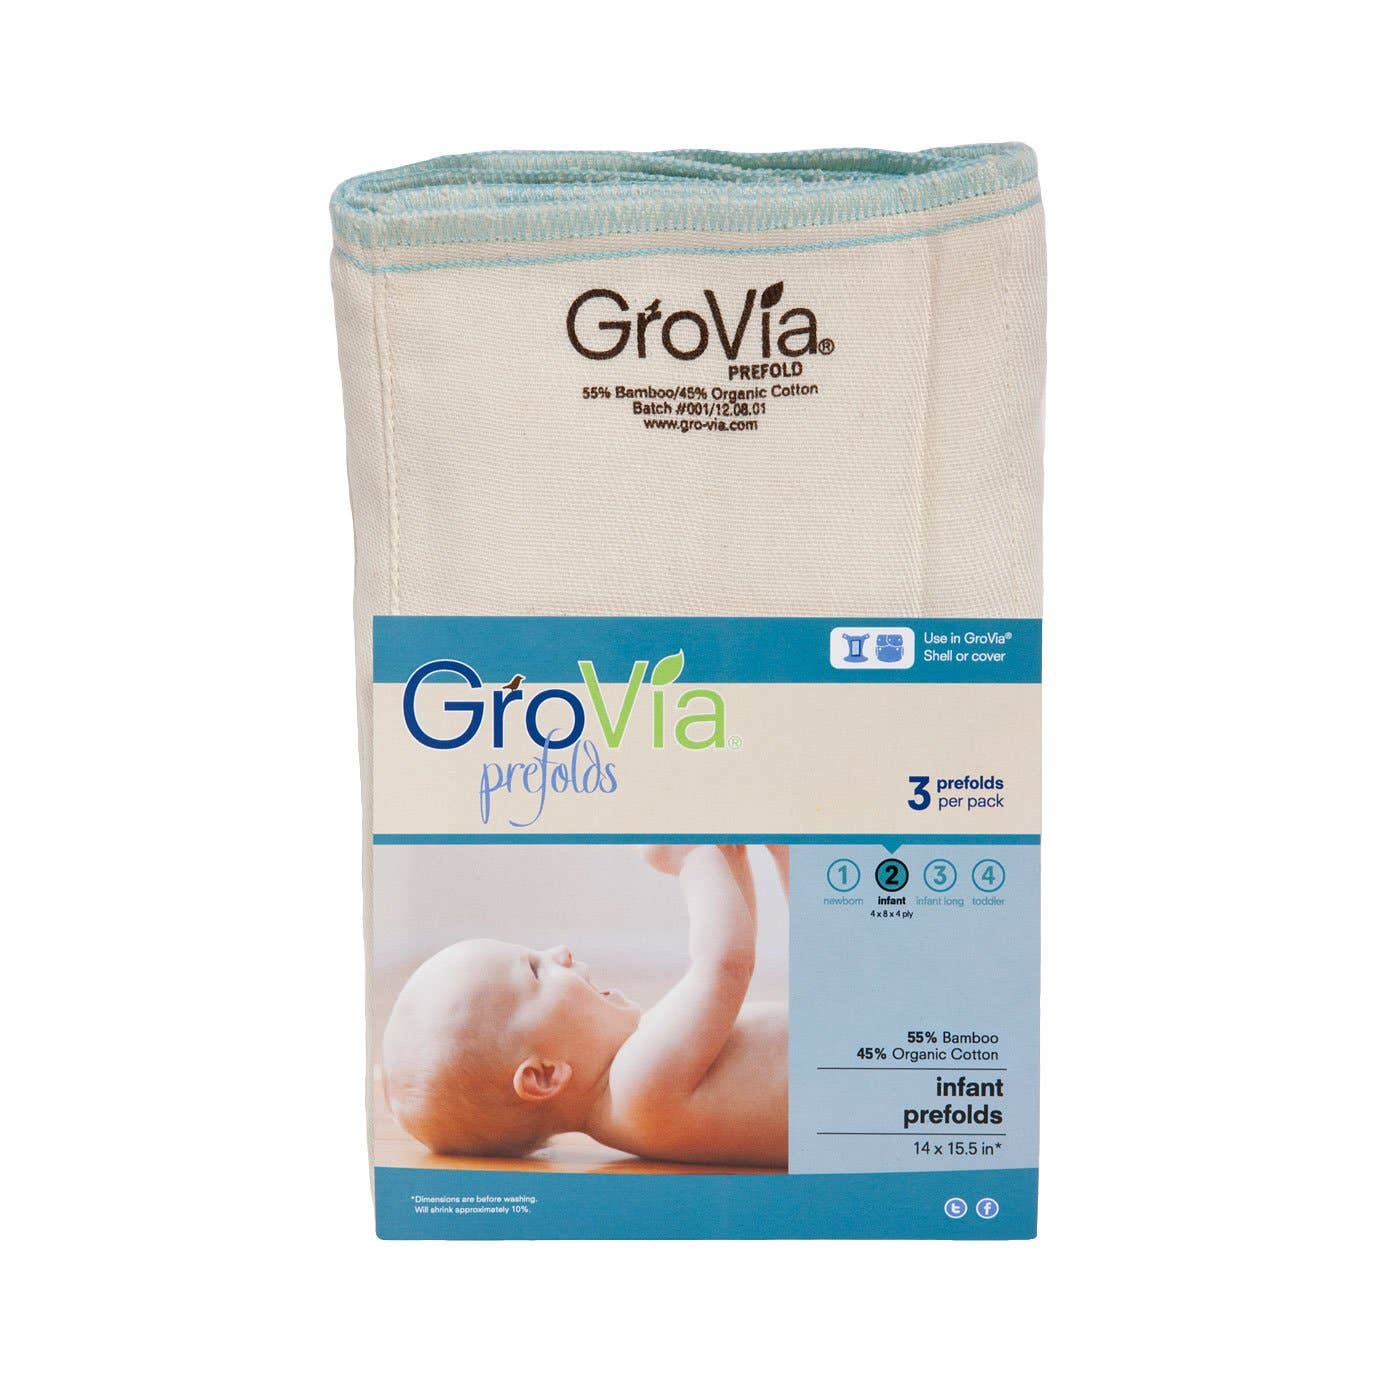 GroVia - Bamboo Prefold Cloth Diapers in a pack of 3 Infant